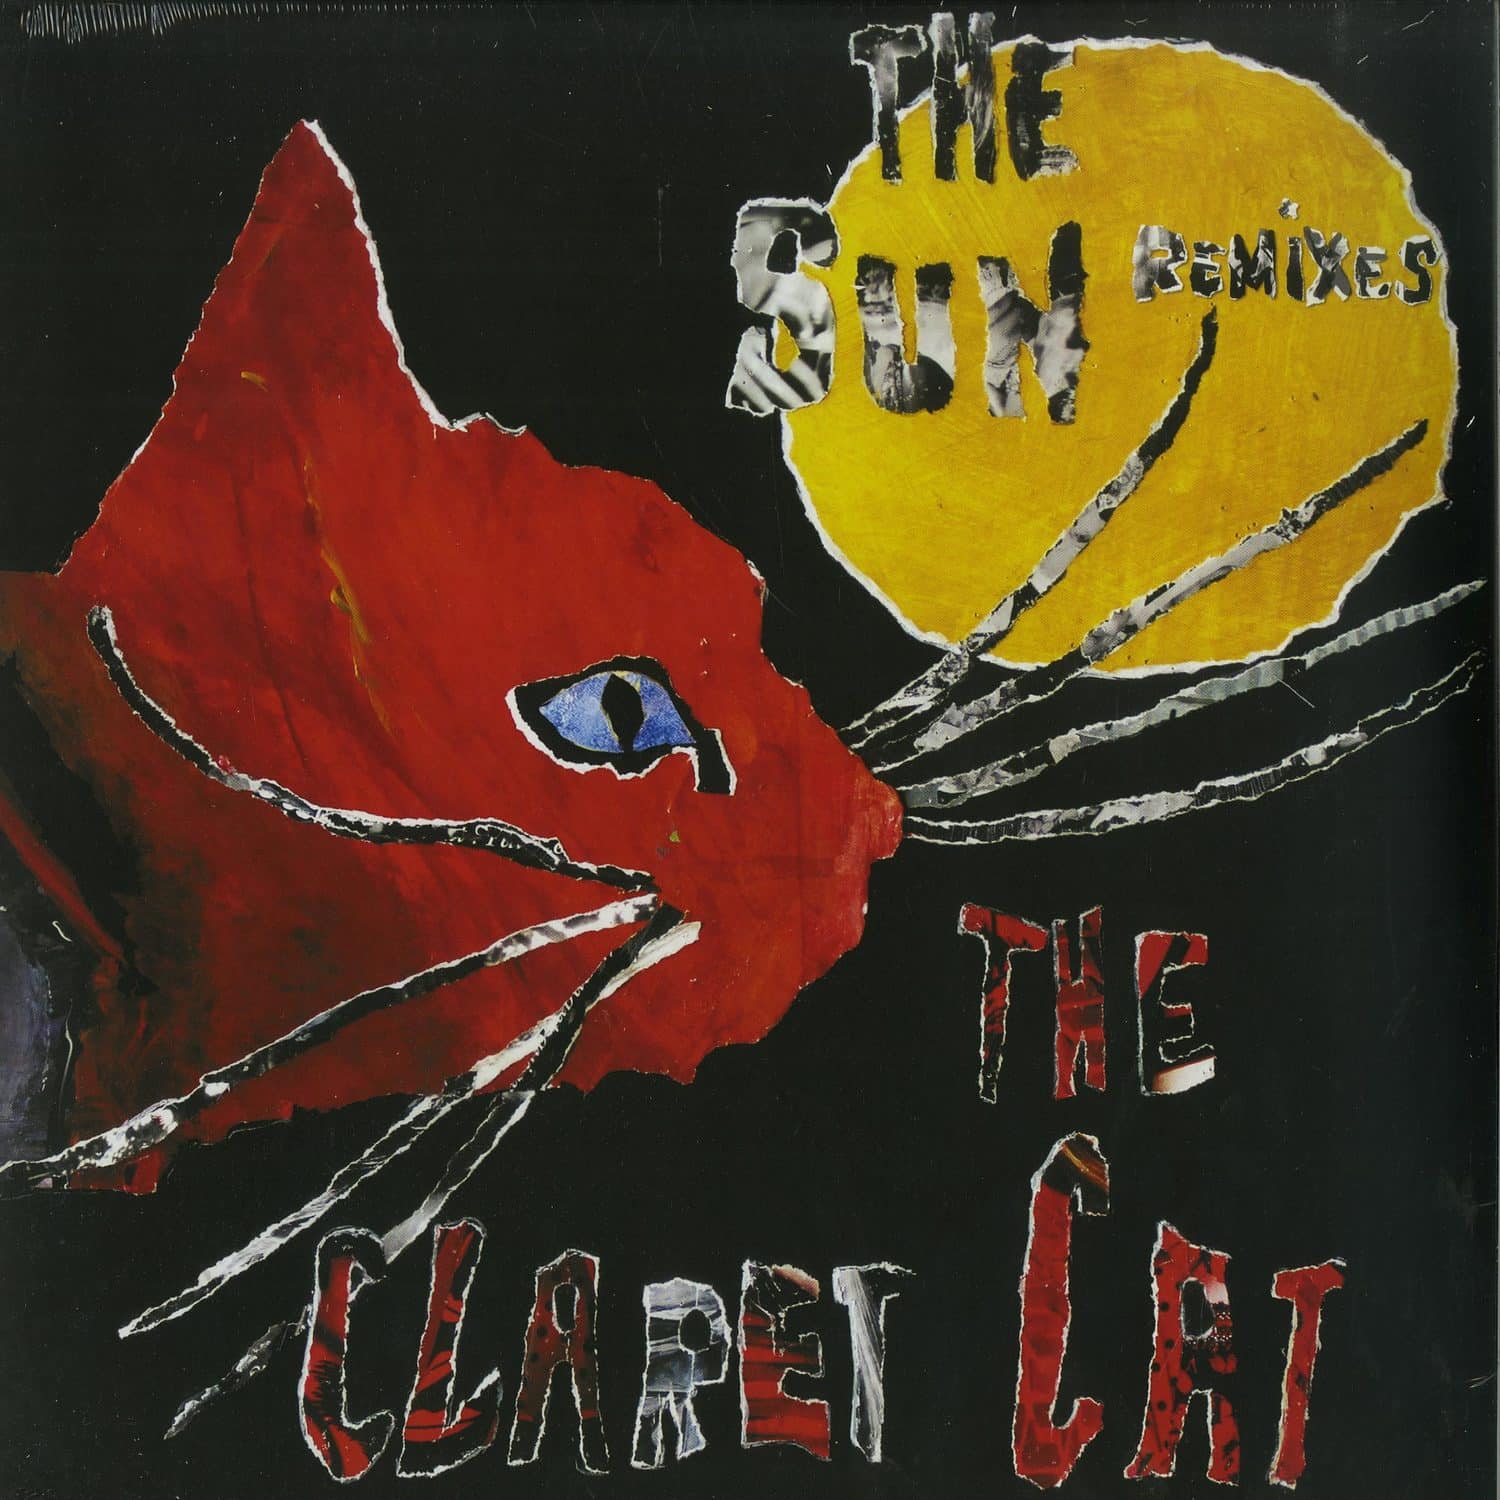 The Claret Cat - THE SUN REMIXES - CHARLES WEBSTER RMX